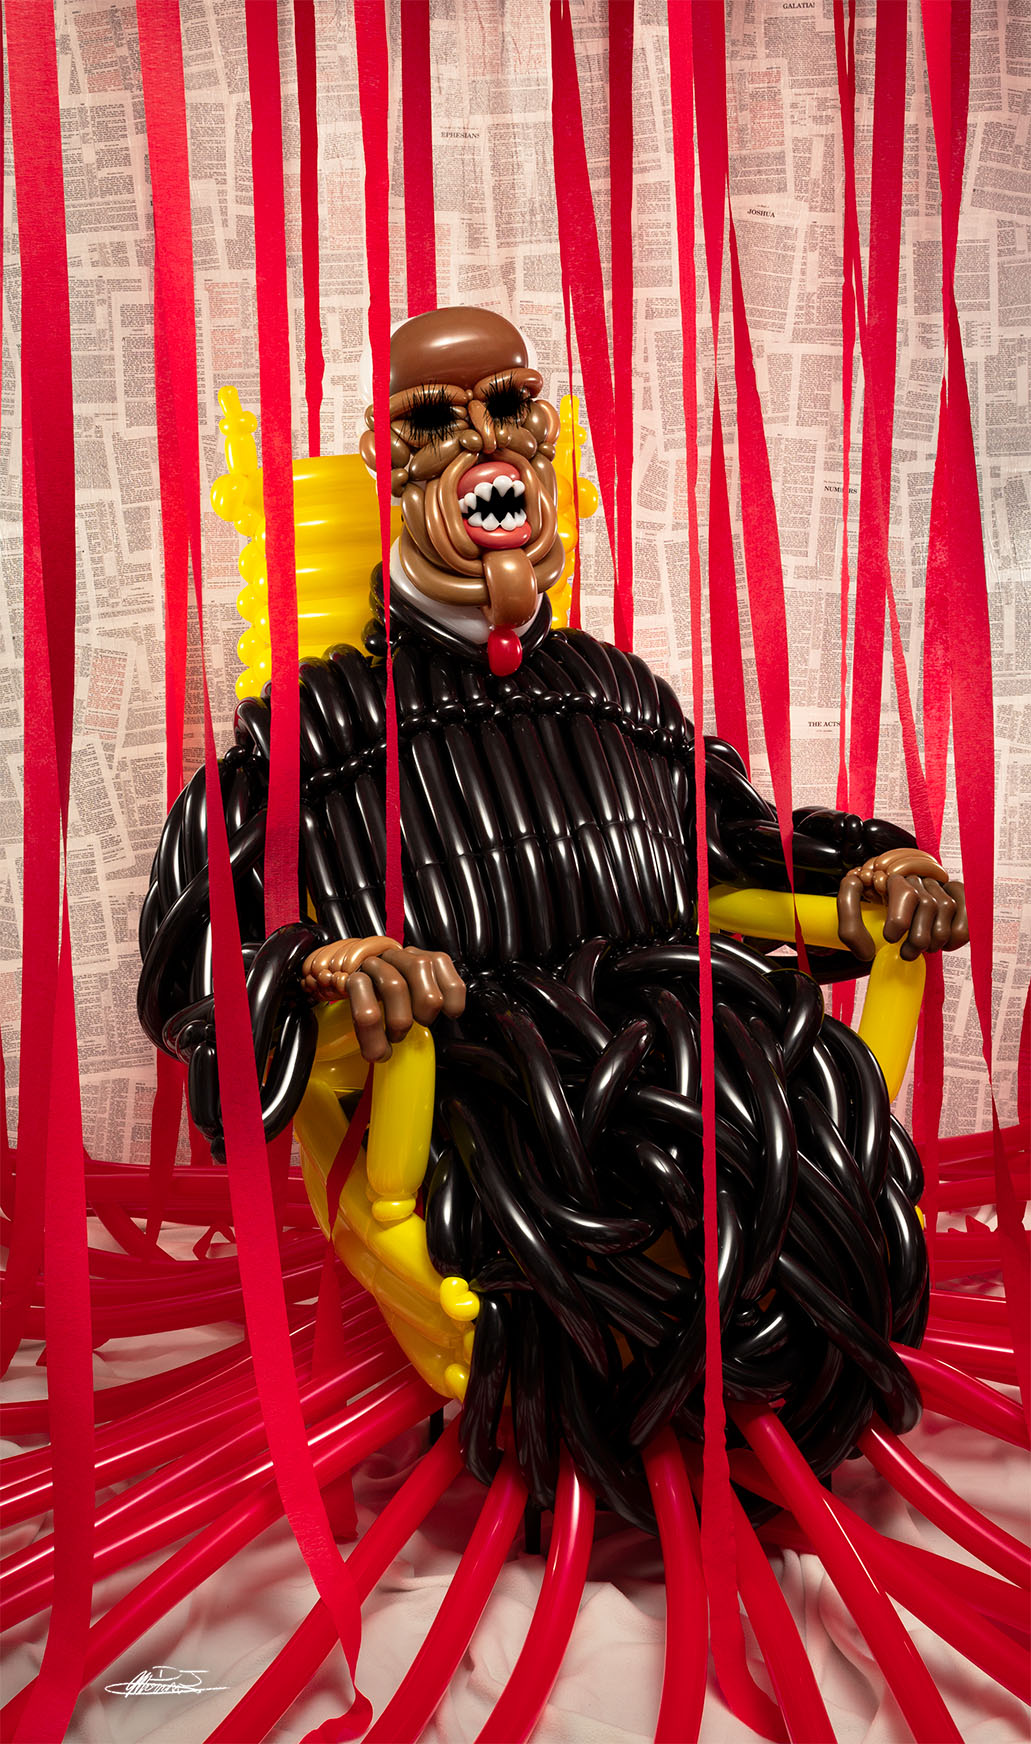 Clarence Thomas balloon sculpture sitting on a golden throne in front of a bible wall backdrop with blood red party streamers hanging down around him in the style of Francis Bacon's Study after Velázquez's Portrait of Pope Innocent X